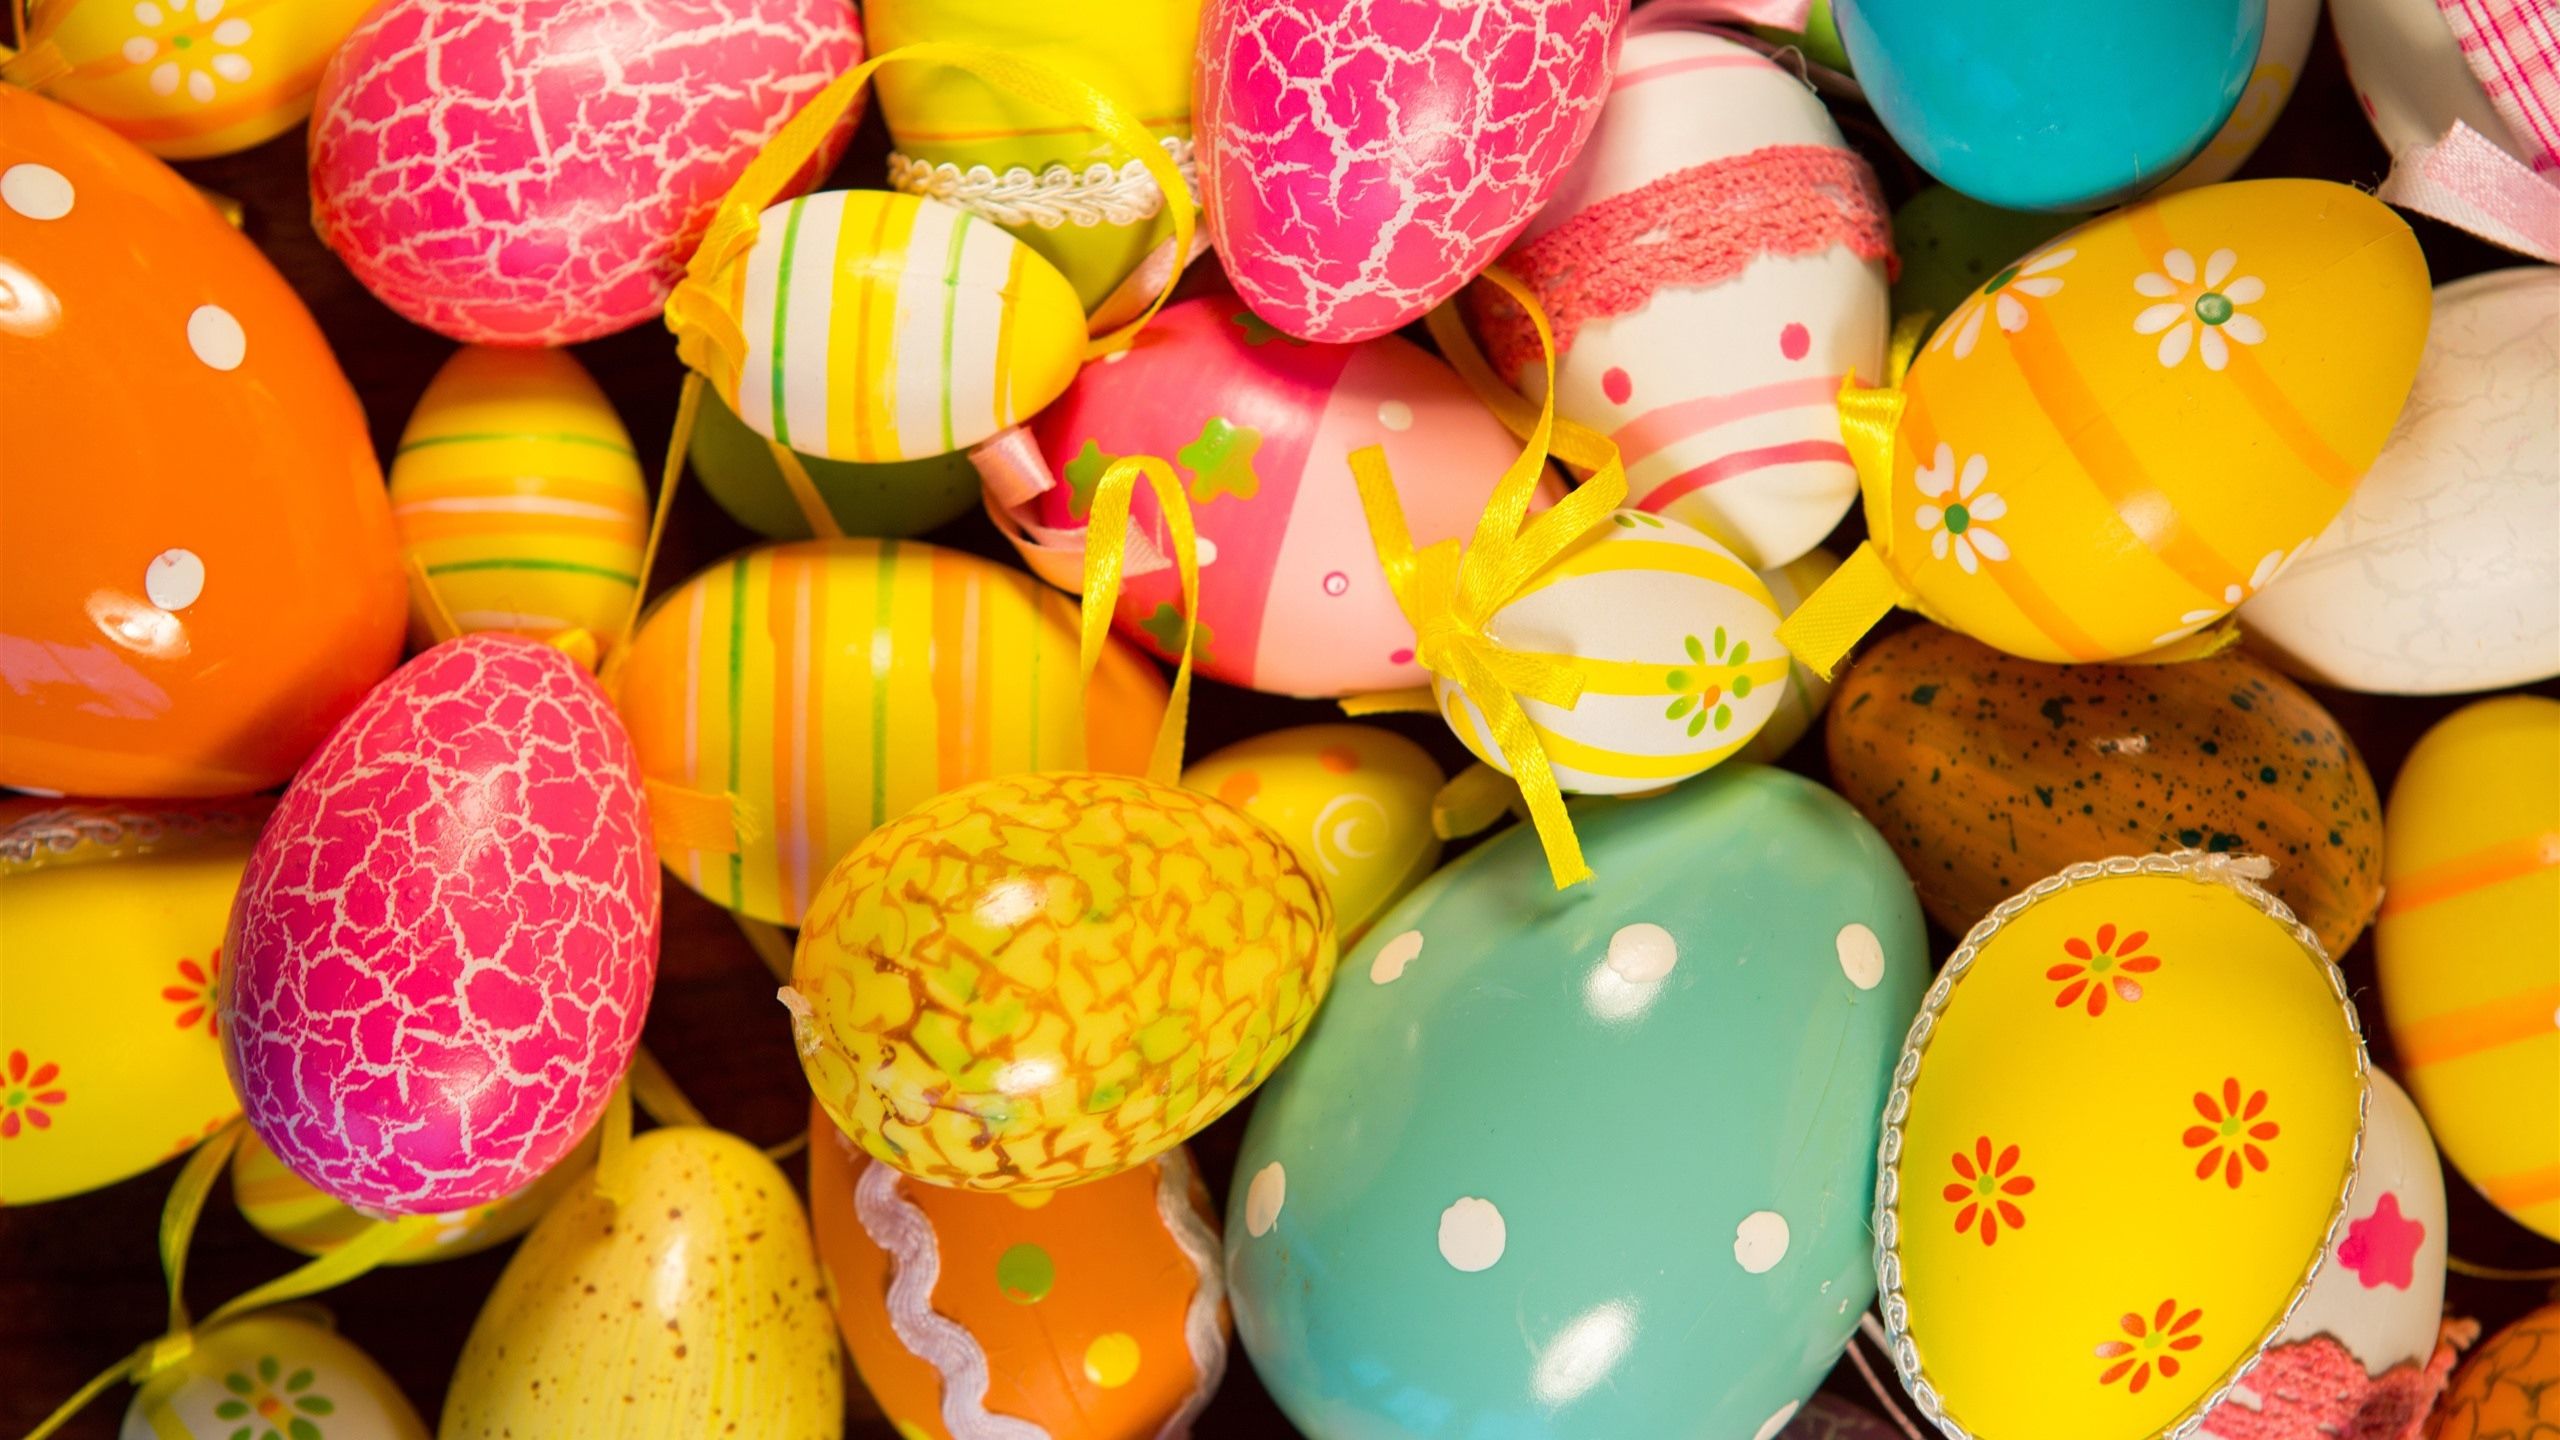 Colorful eggs aesthetic Wallpaper Download